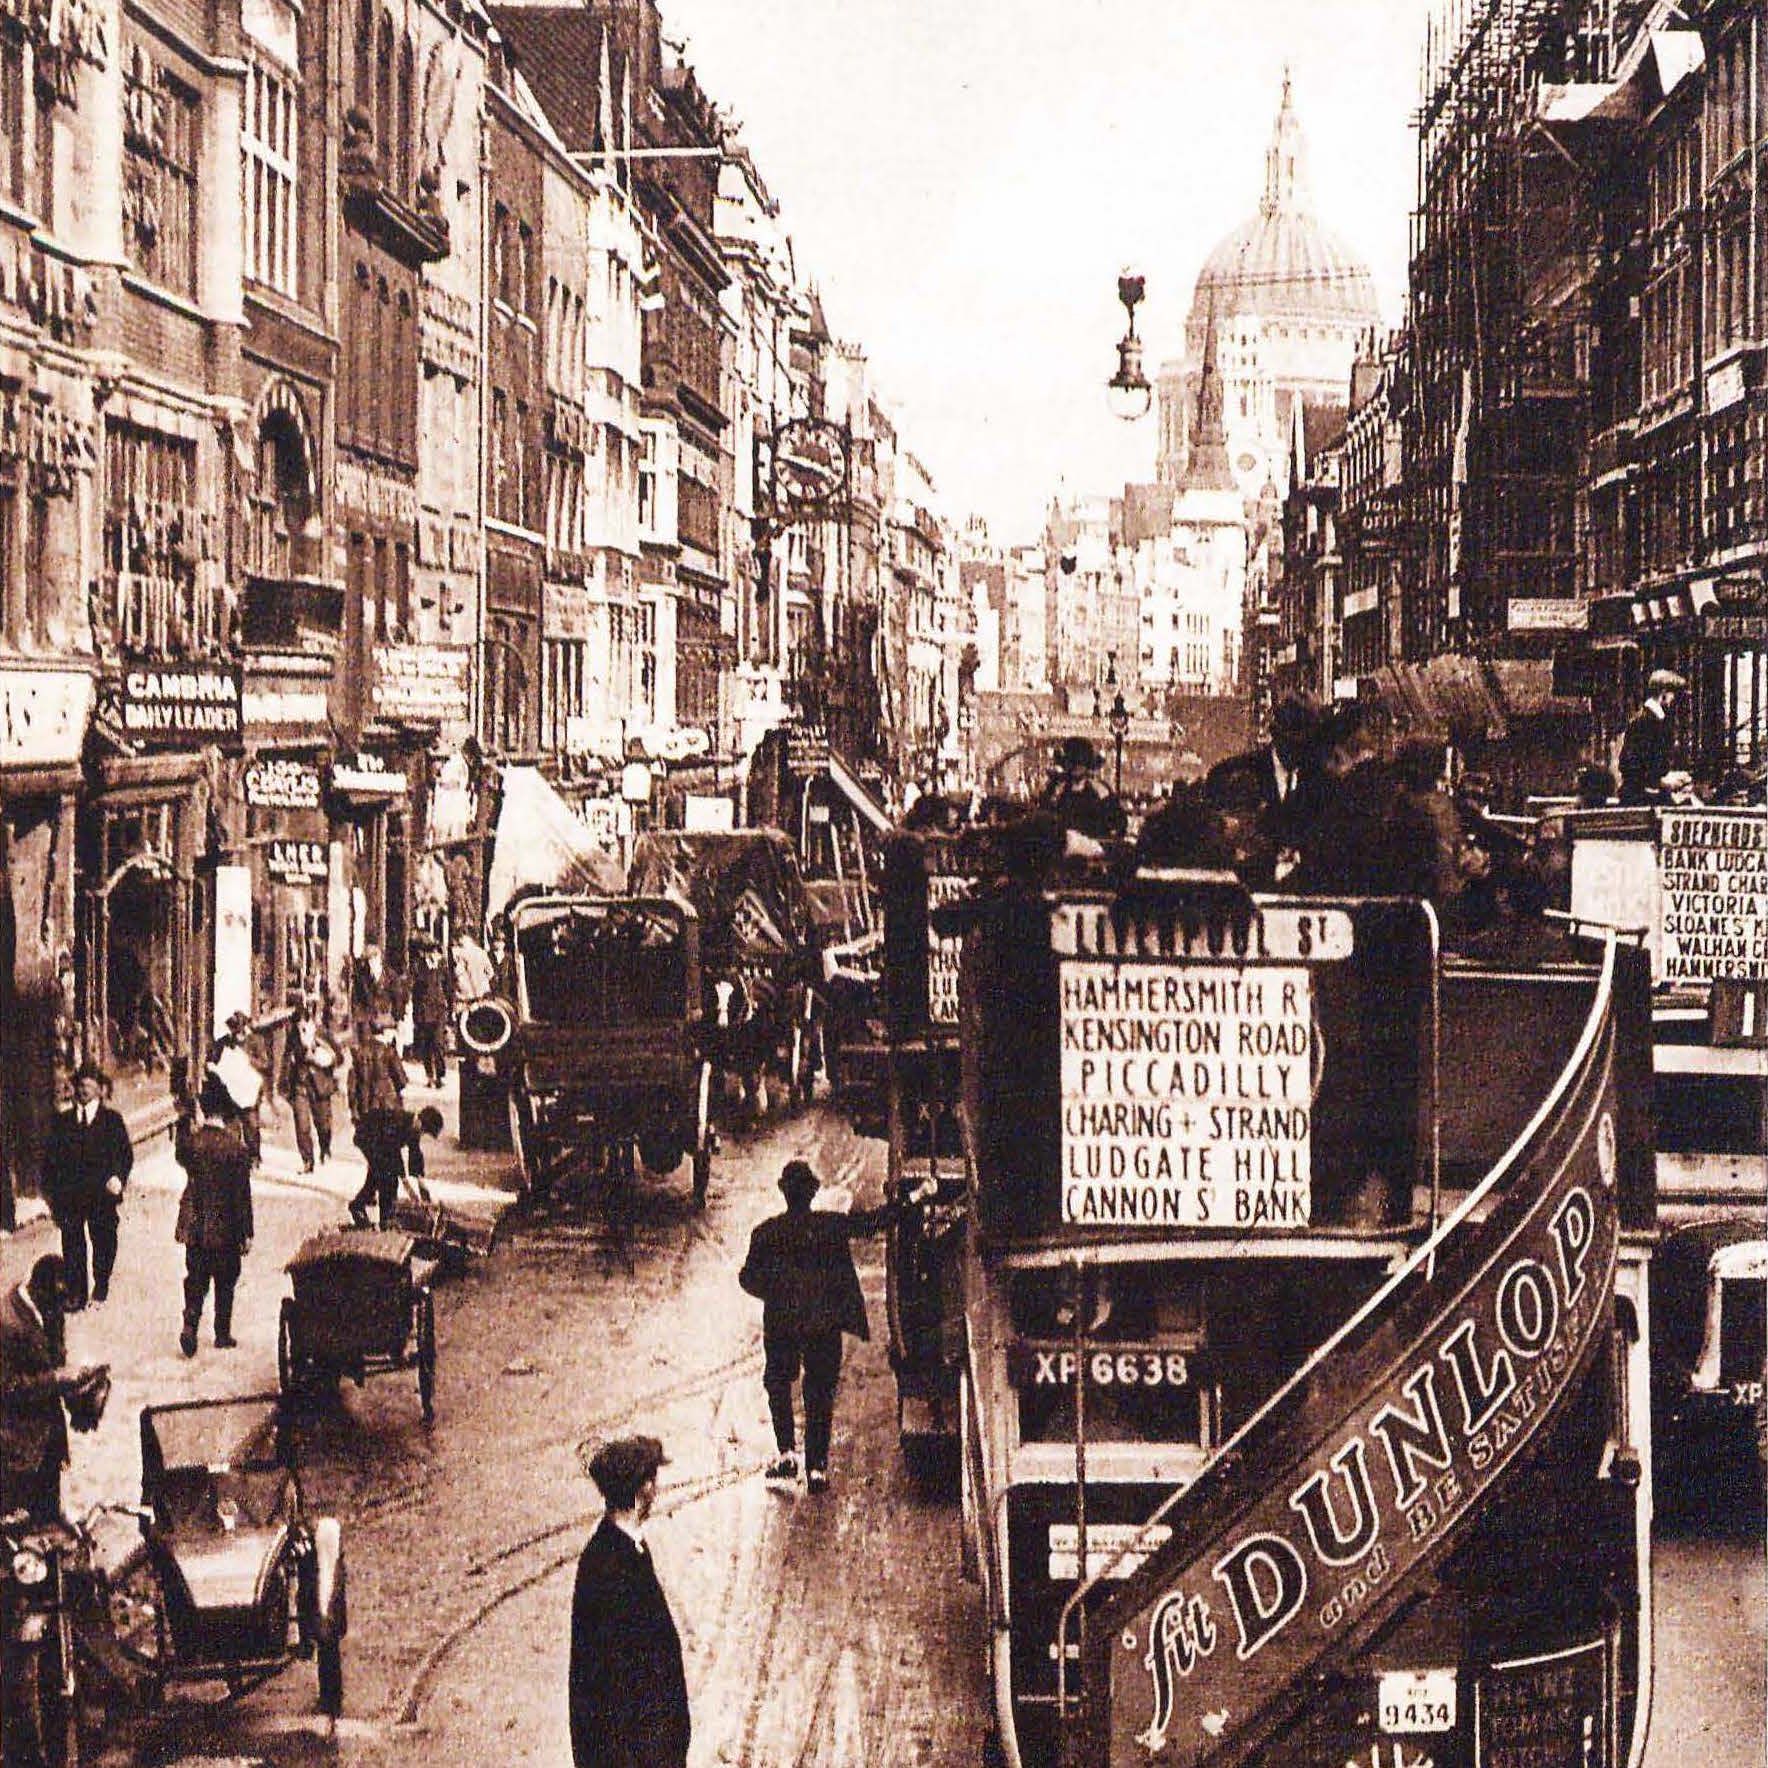 With Camera and Record, Disc 3, Side A: “Fleet Street”